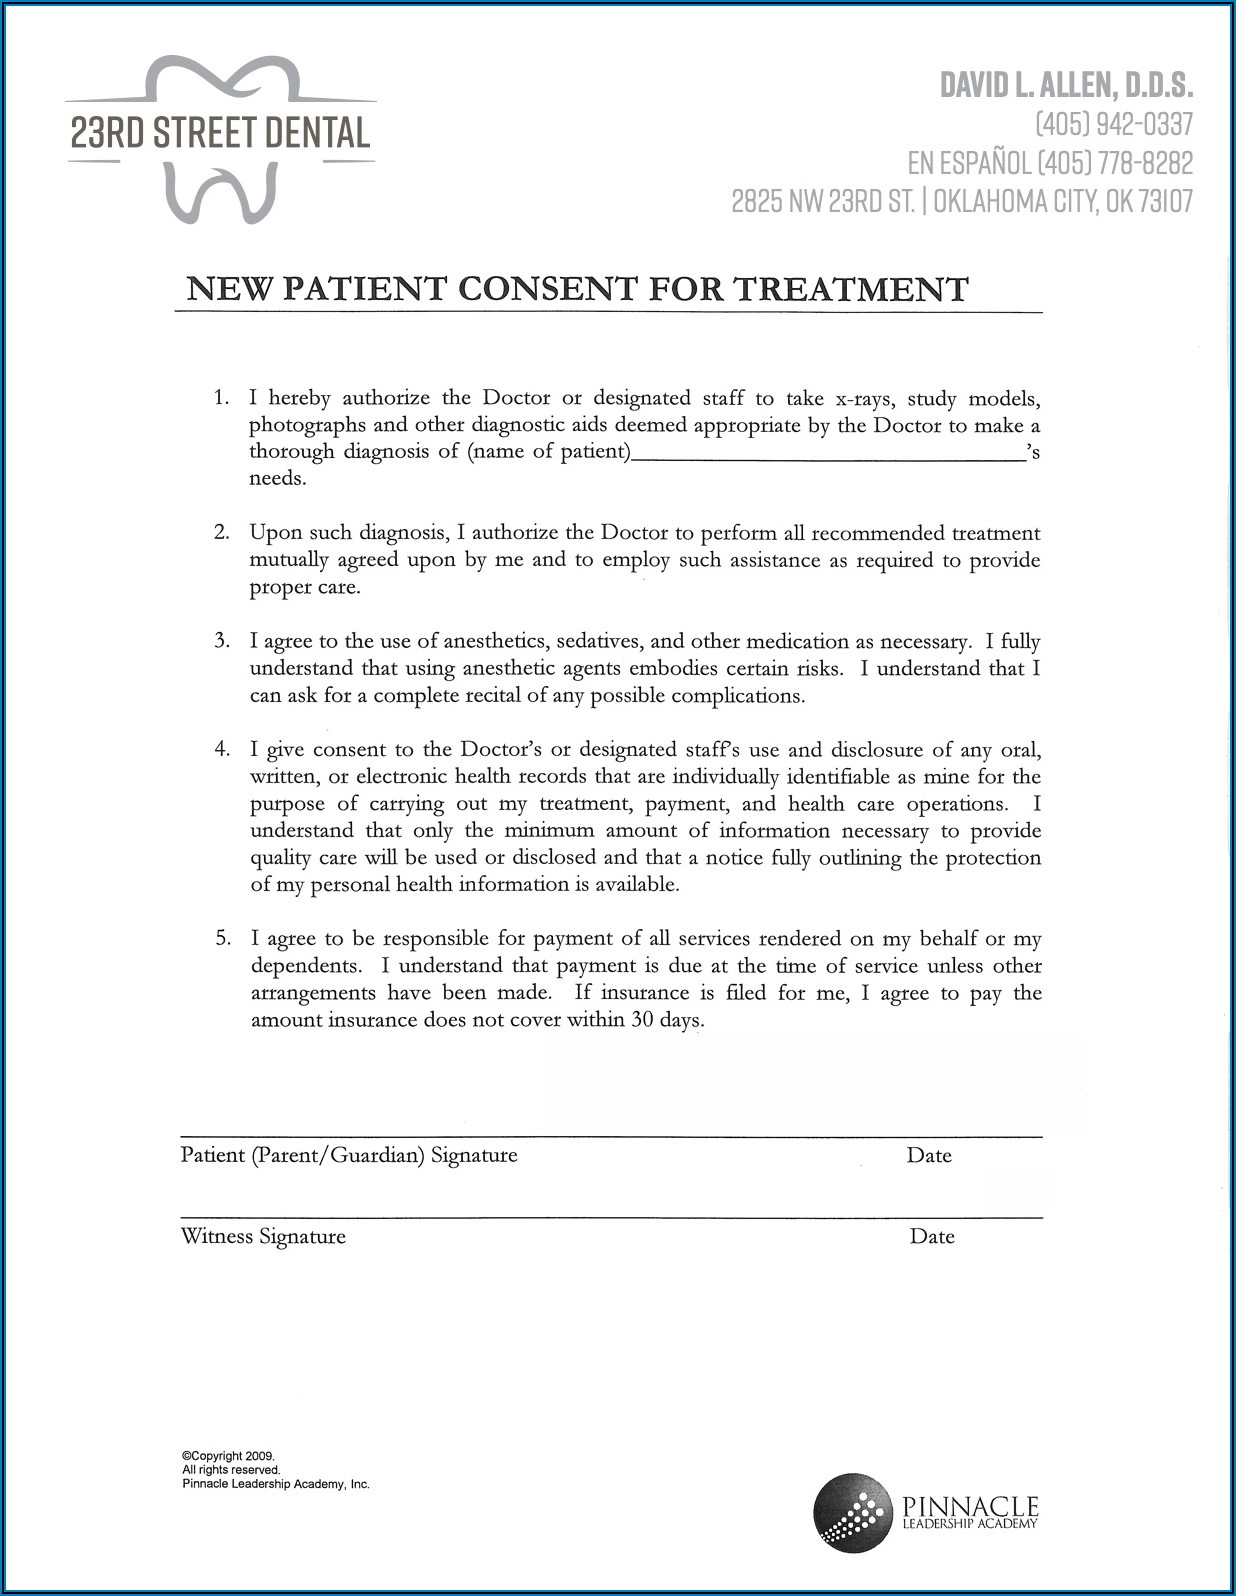 Covid 19 Dental Consent Form In Spanish